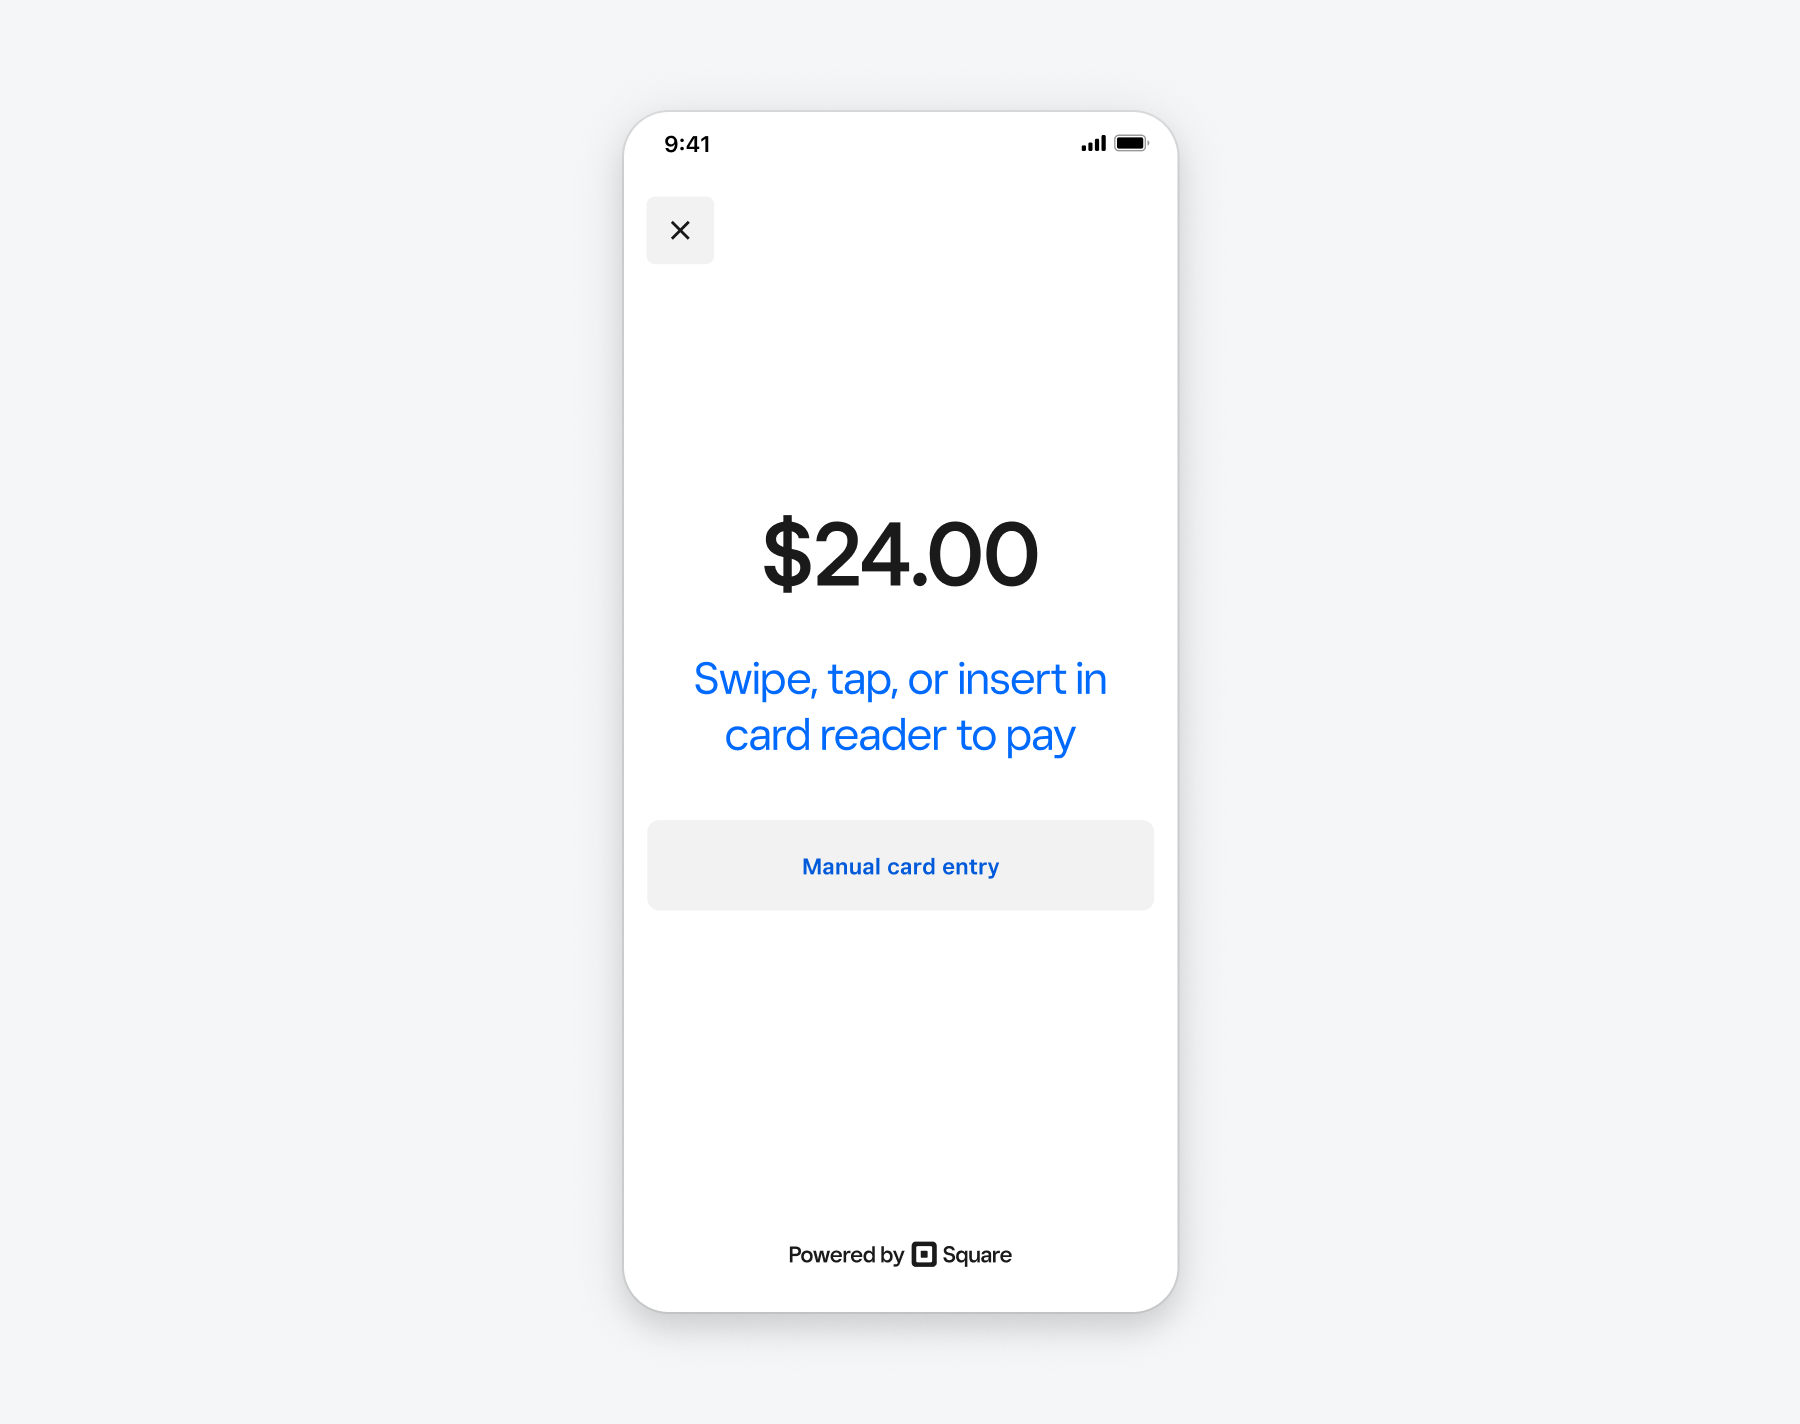 A graphic showing the Square-provided payment prompt screen for the Mobile Payments SDK. The screen shows a 24 dollar payment and prompts the buyer to swipe, tap, or insert in card reader to pay.